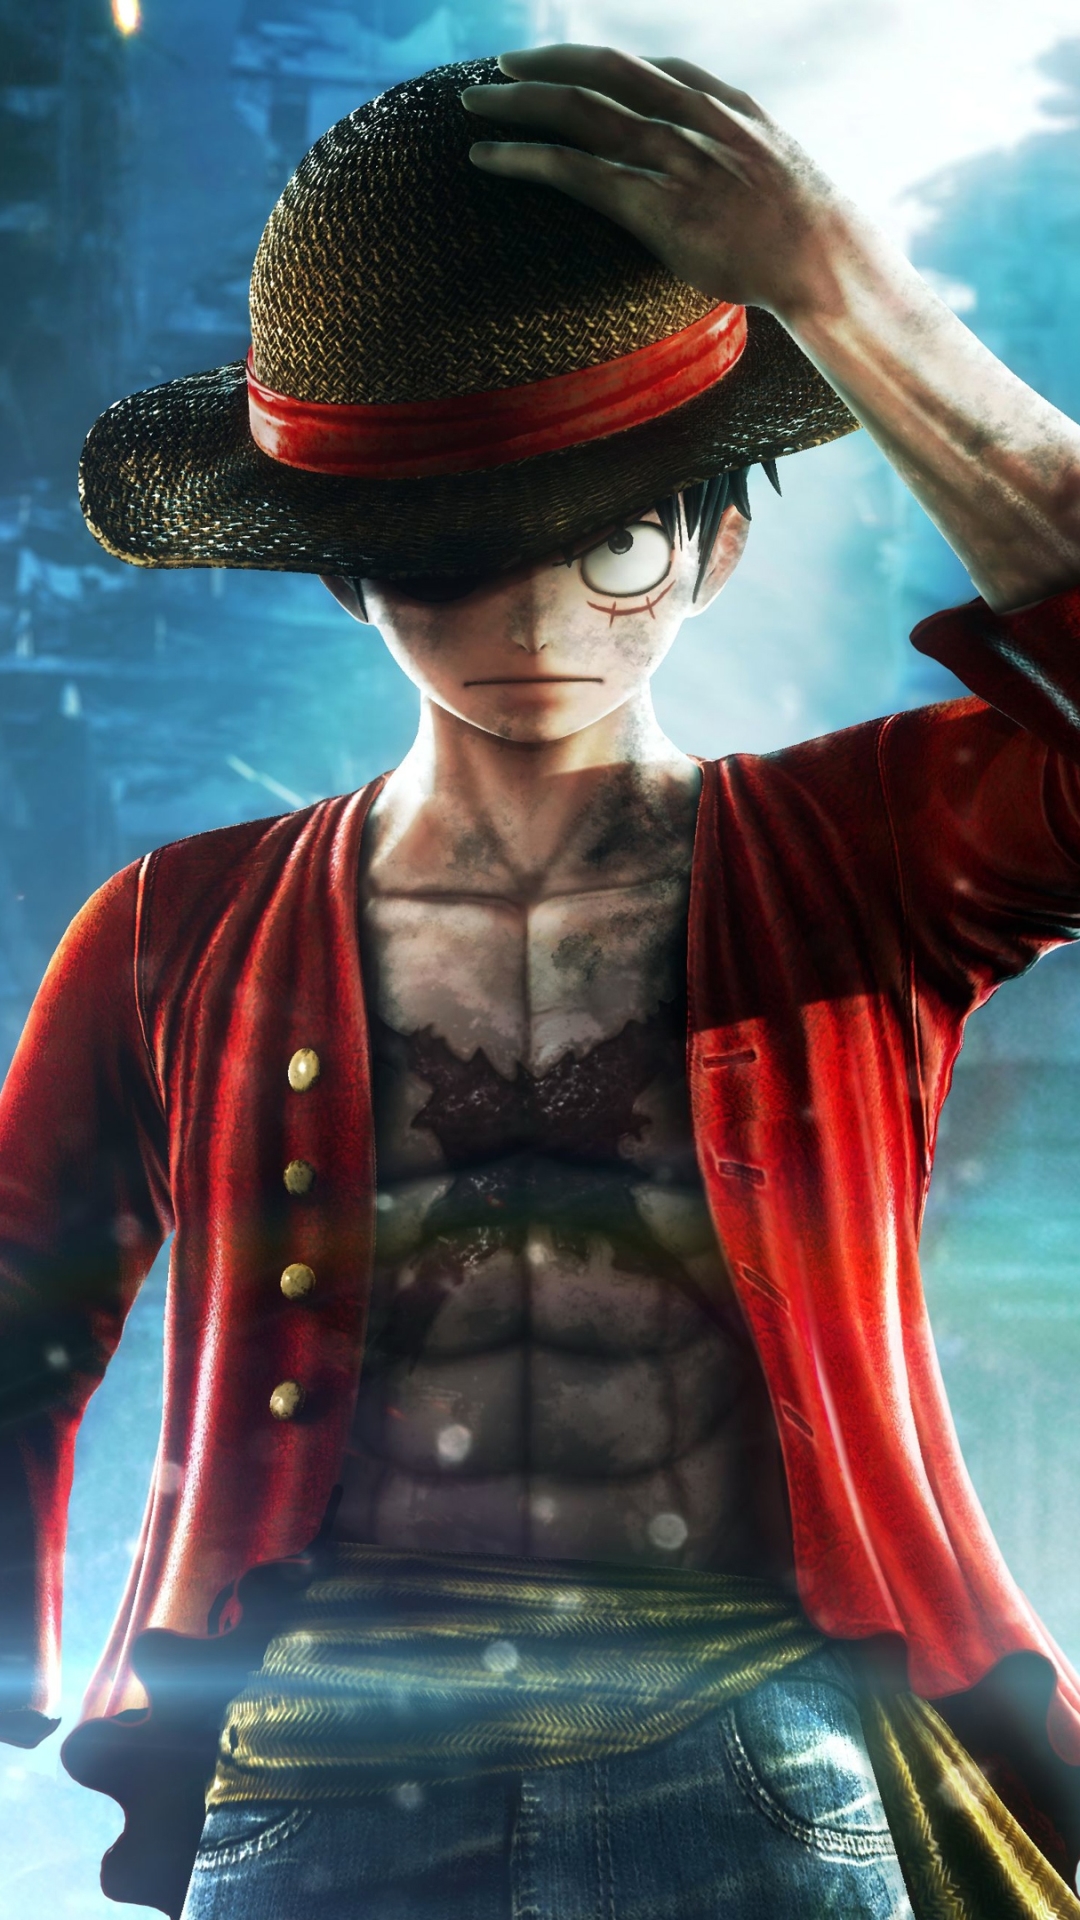 jump force, video game, monkey d luffy